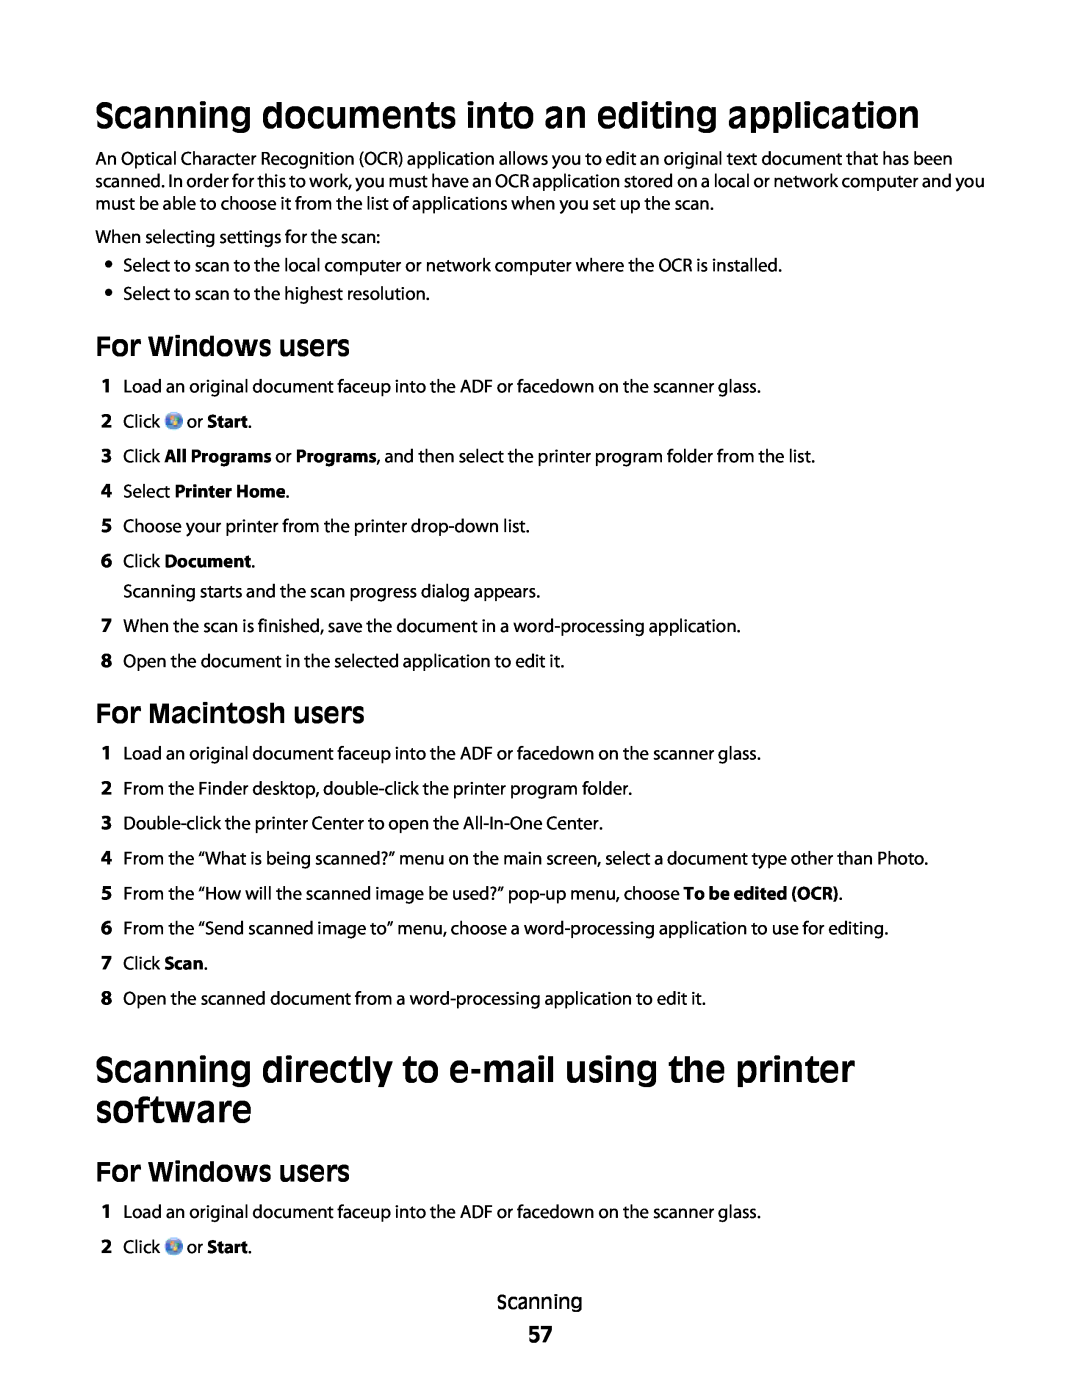 Lexmark 10E Scanning documents into an editing application, For Windows users, For Macintosh users, 4Select Printer Home 